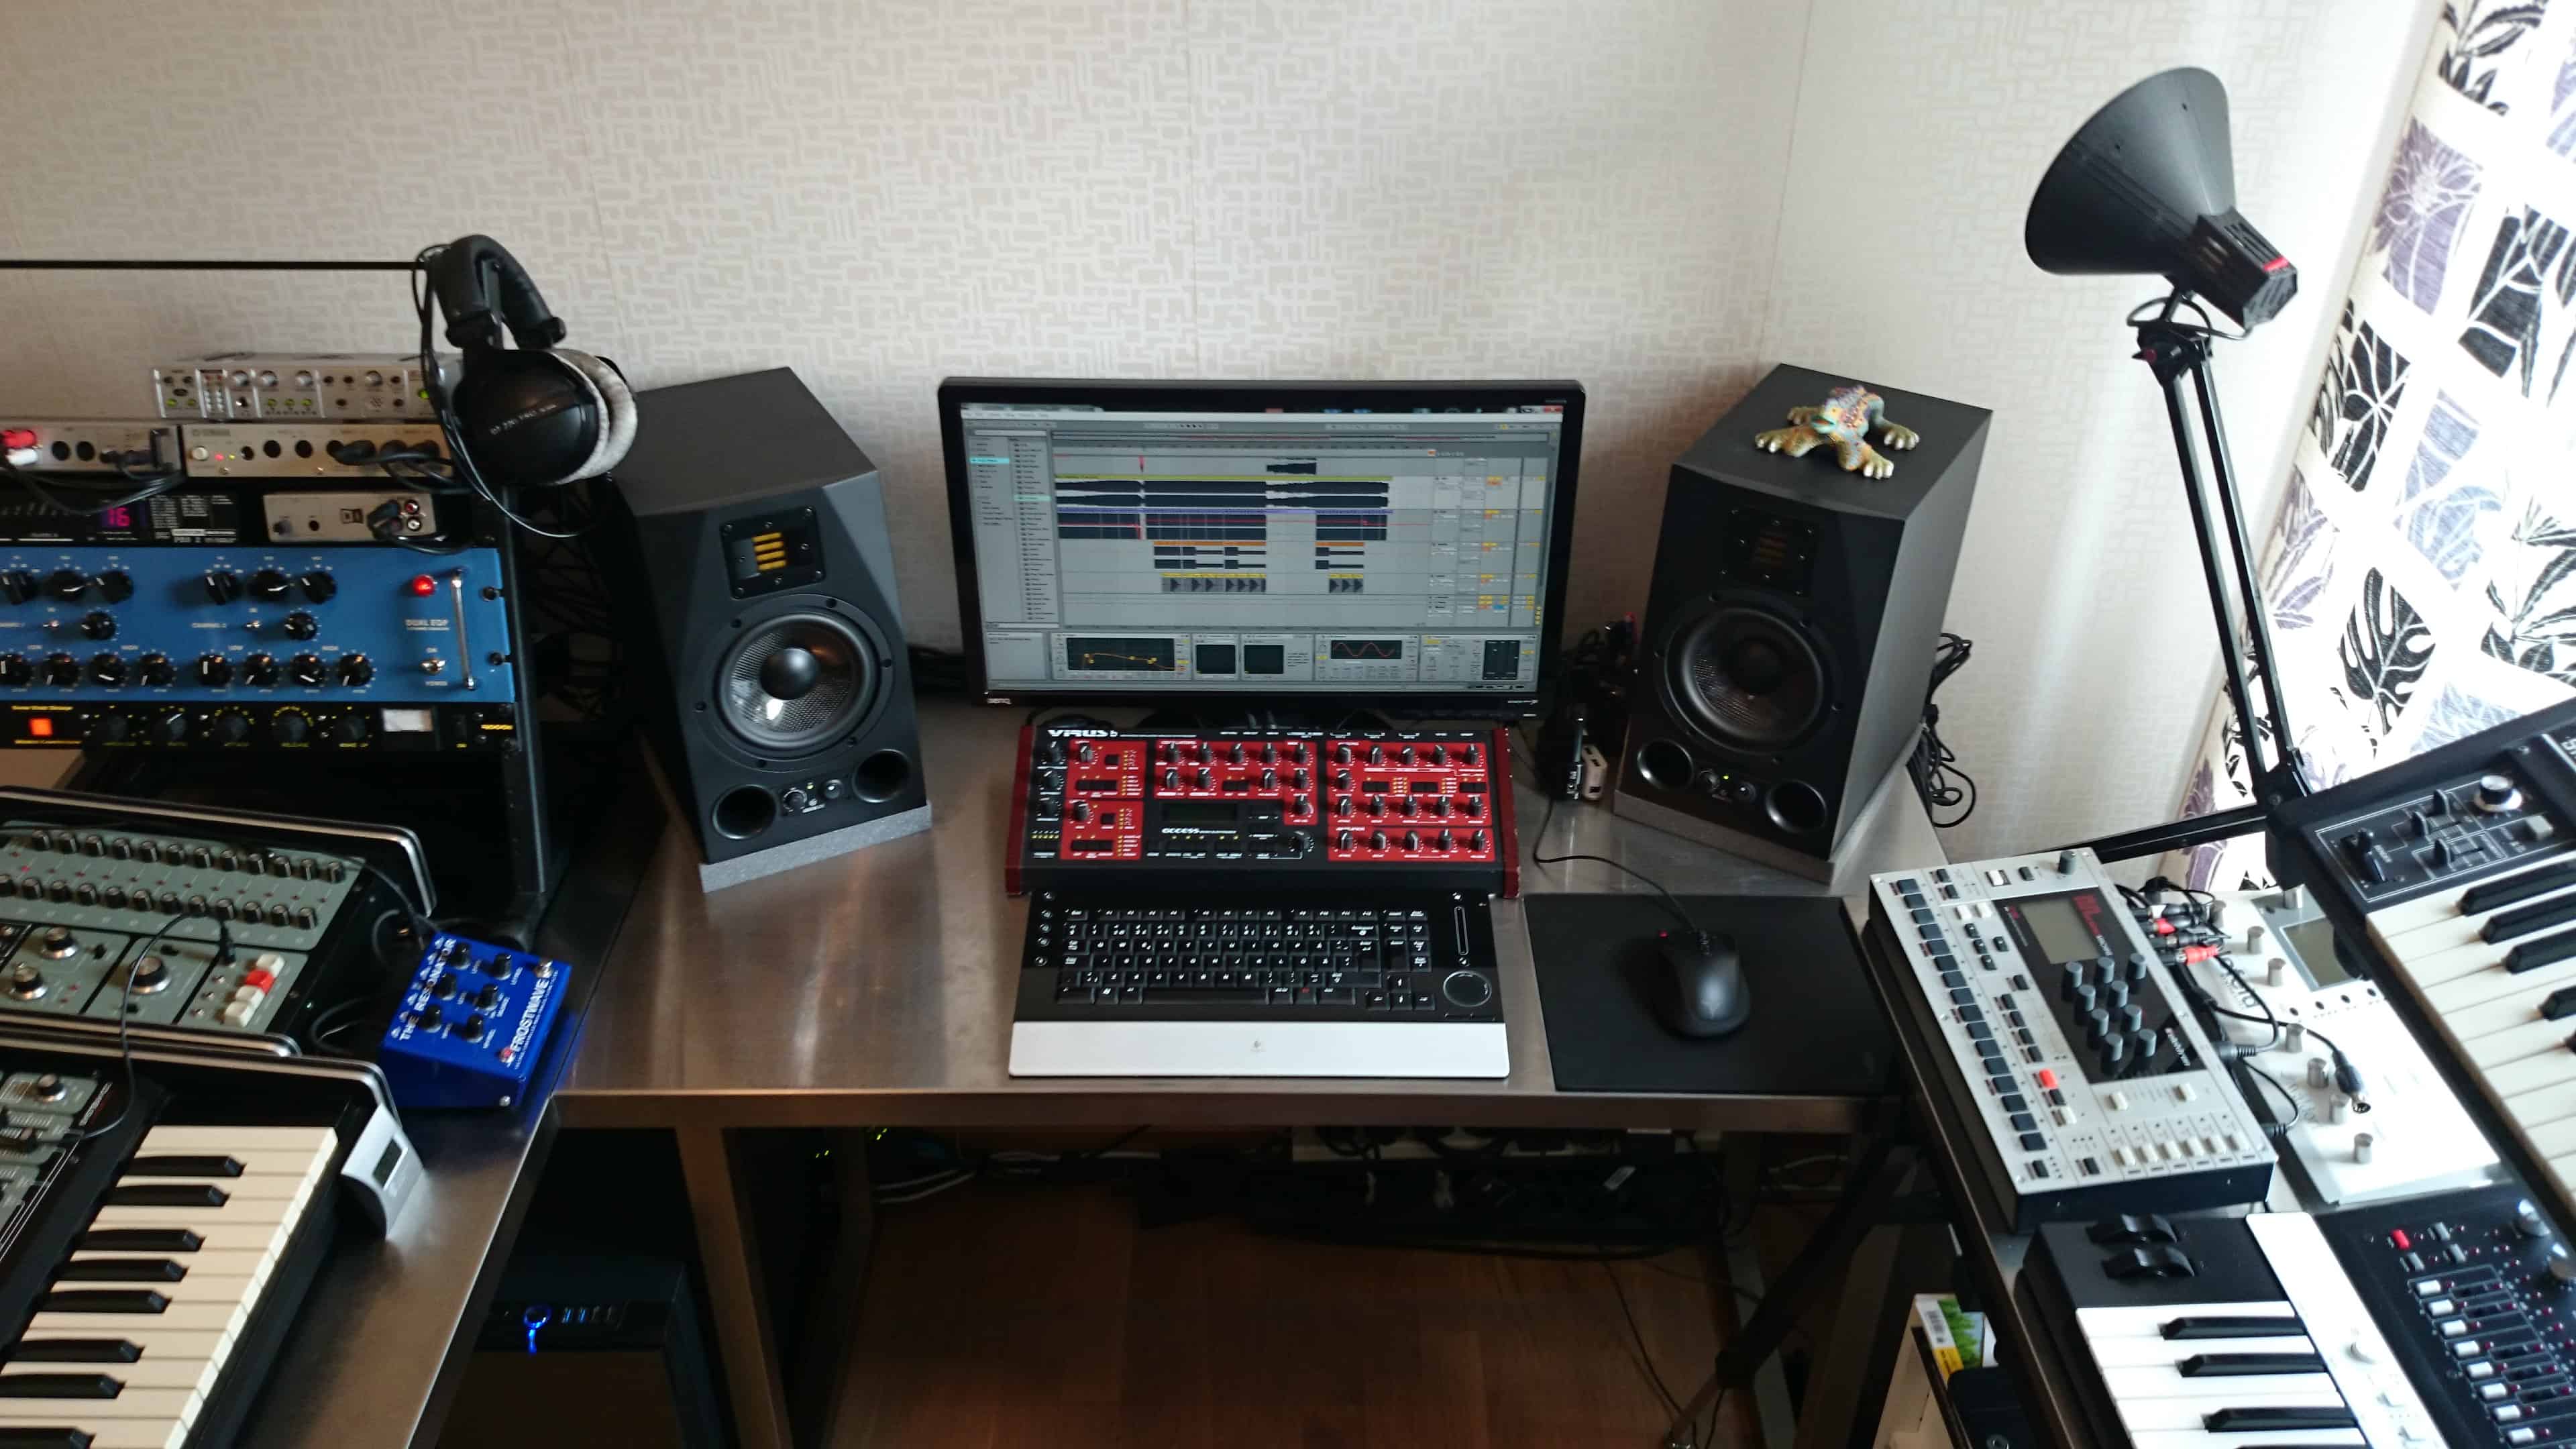 New photo of my studio together with the Adam A7X monitors | Fogelberg.com